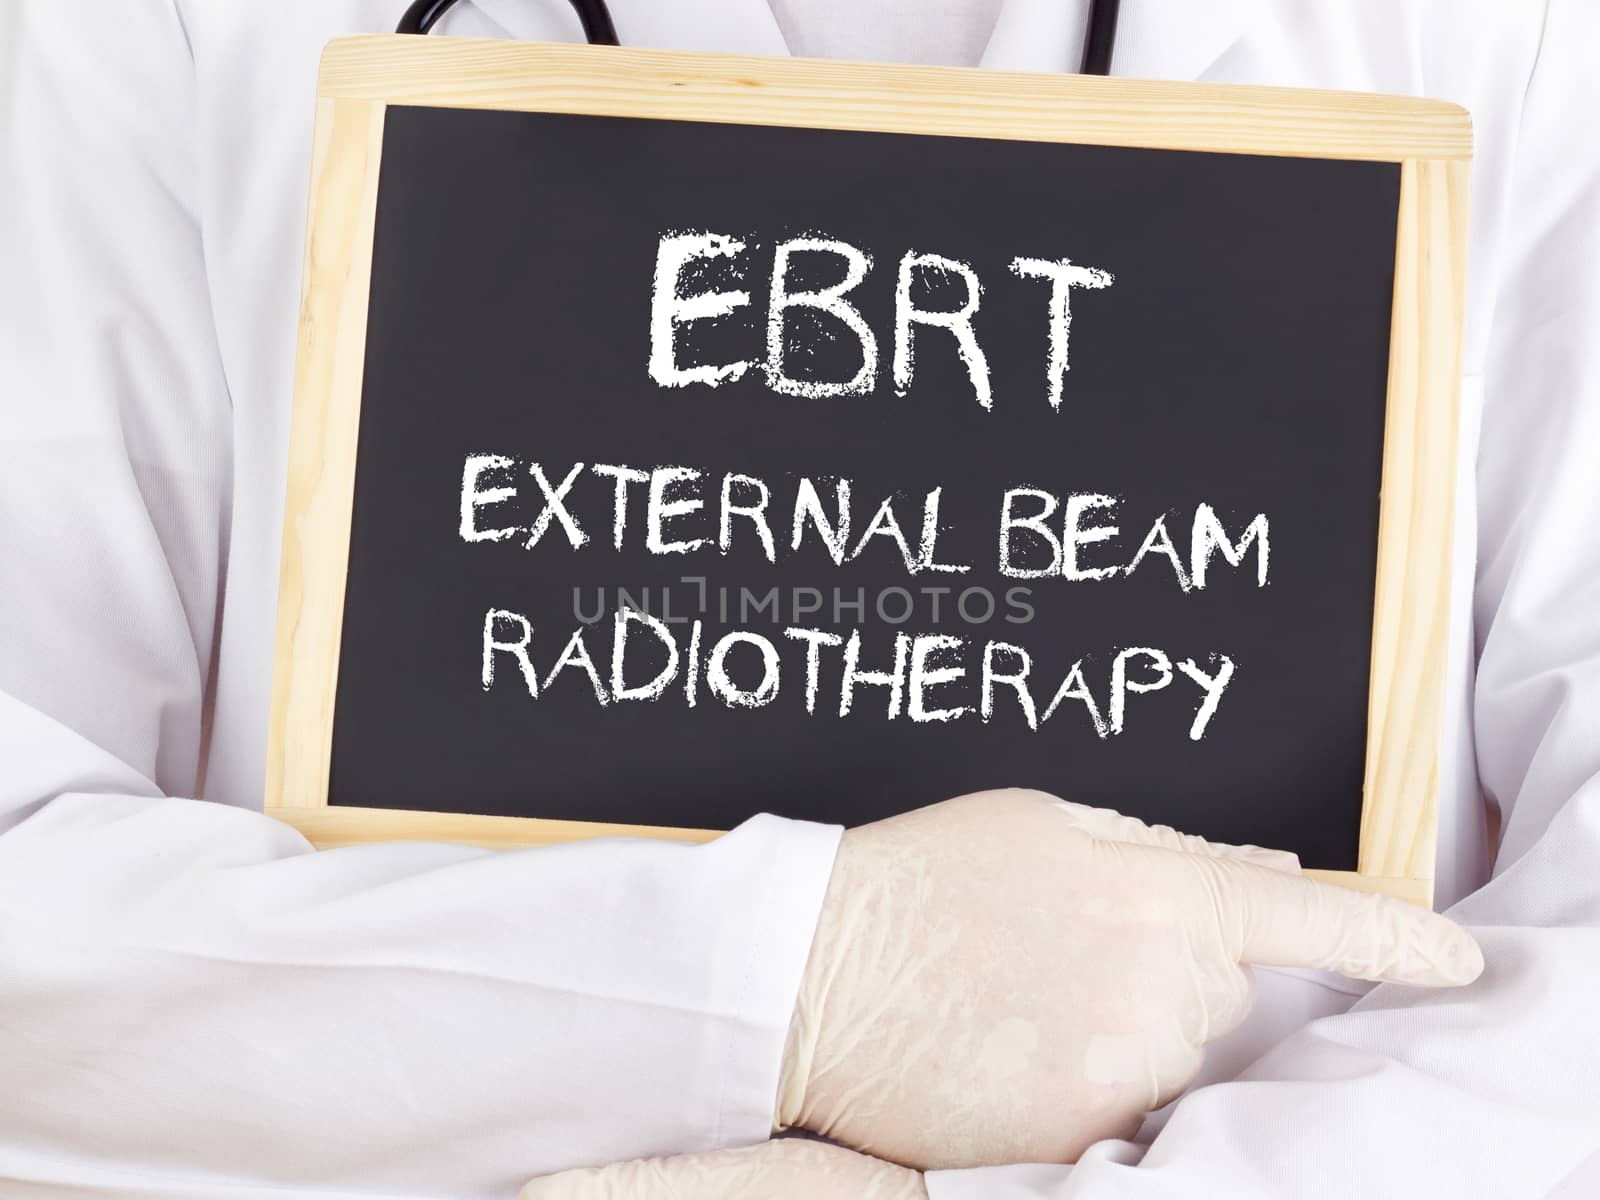 Doctor shows information: EBRT external beam radiotherapy